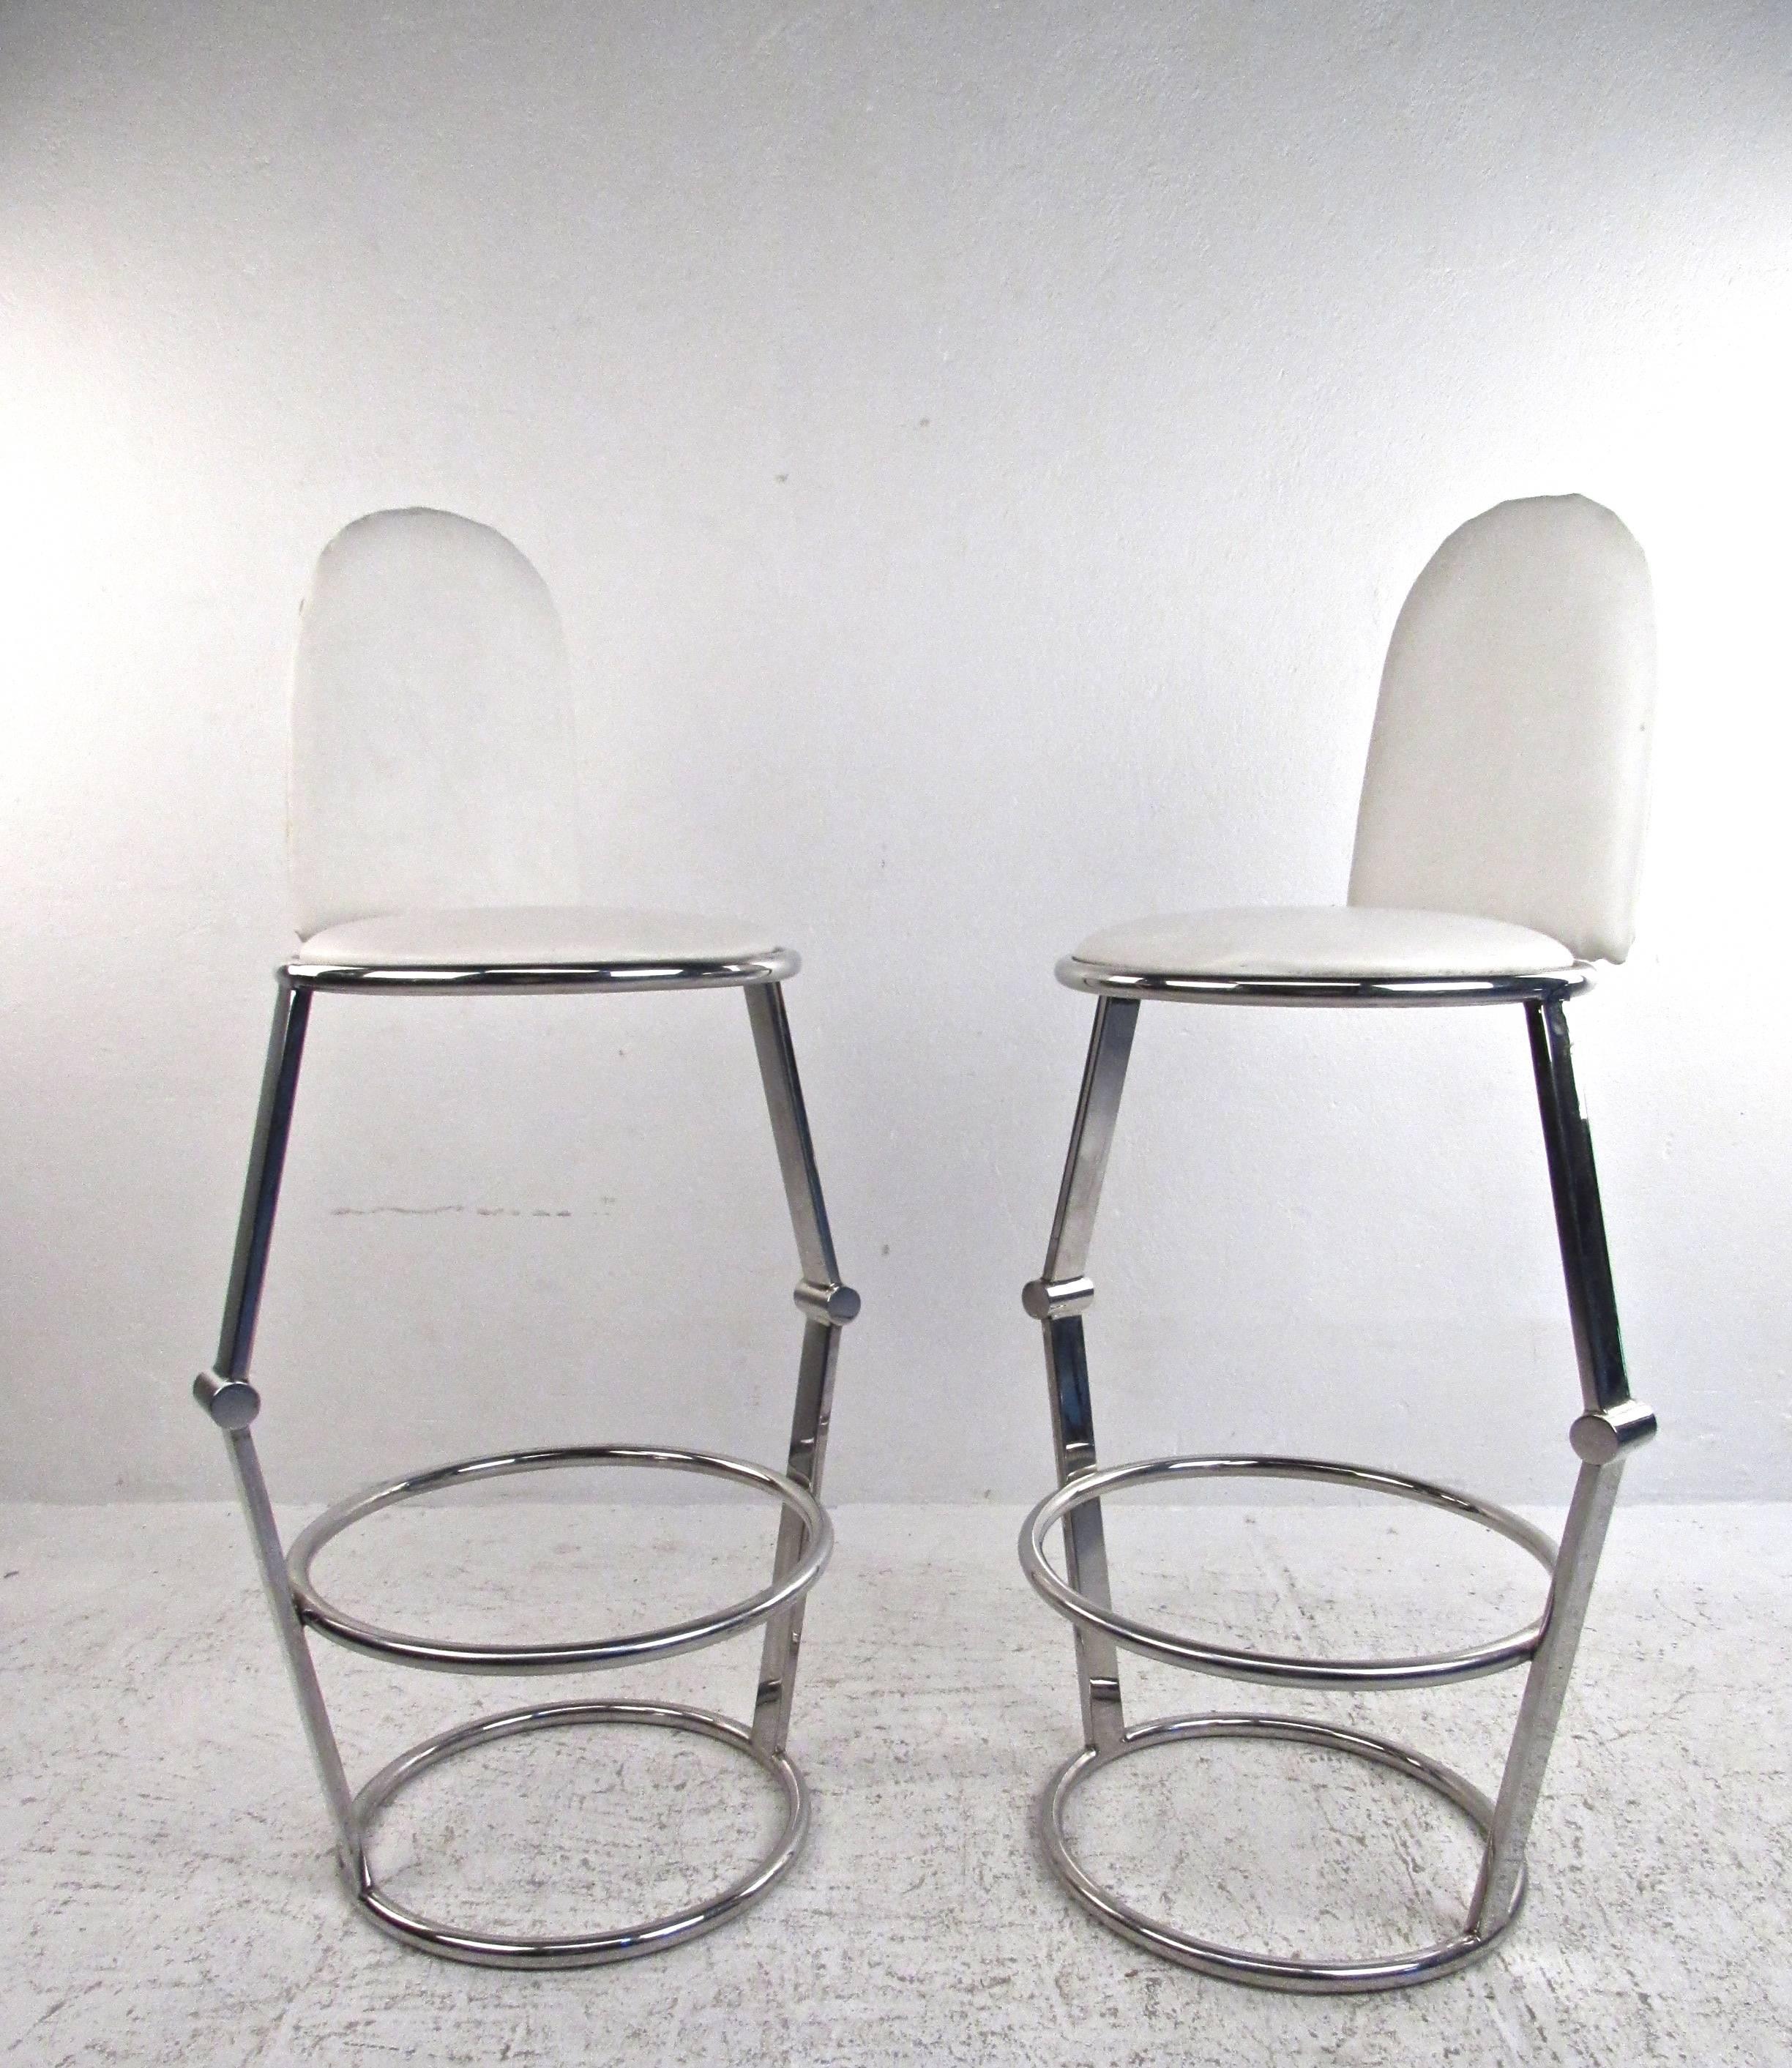 Pair of Mid-Century Style Chrome and Vinyl Bar Stools In Good Condition For Sale In Brooklyn, NY